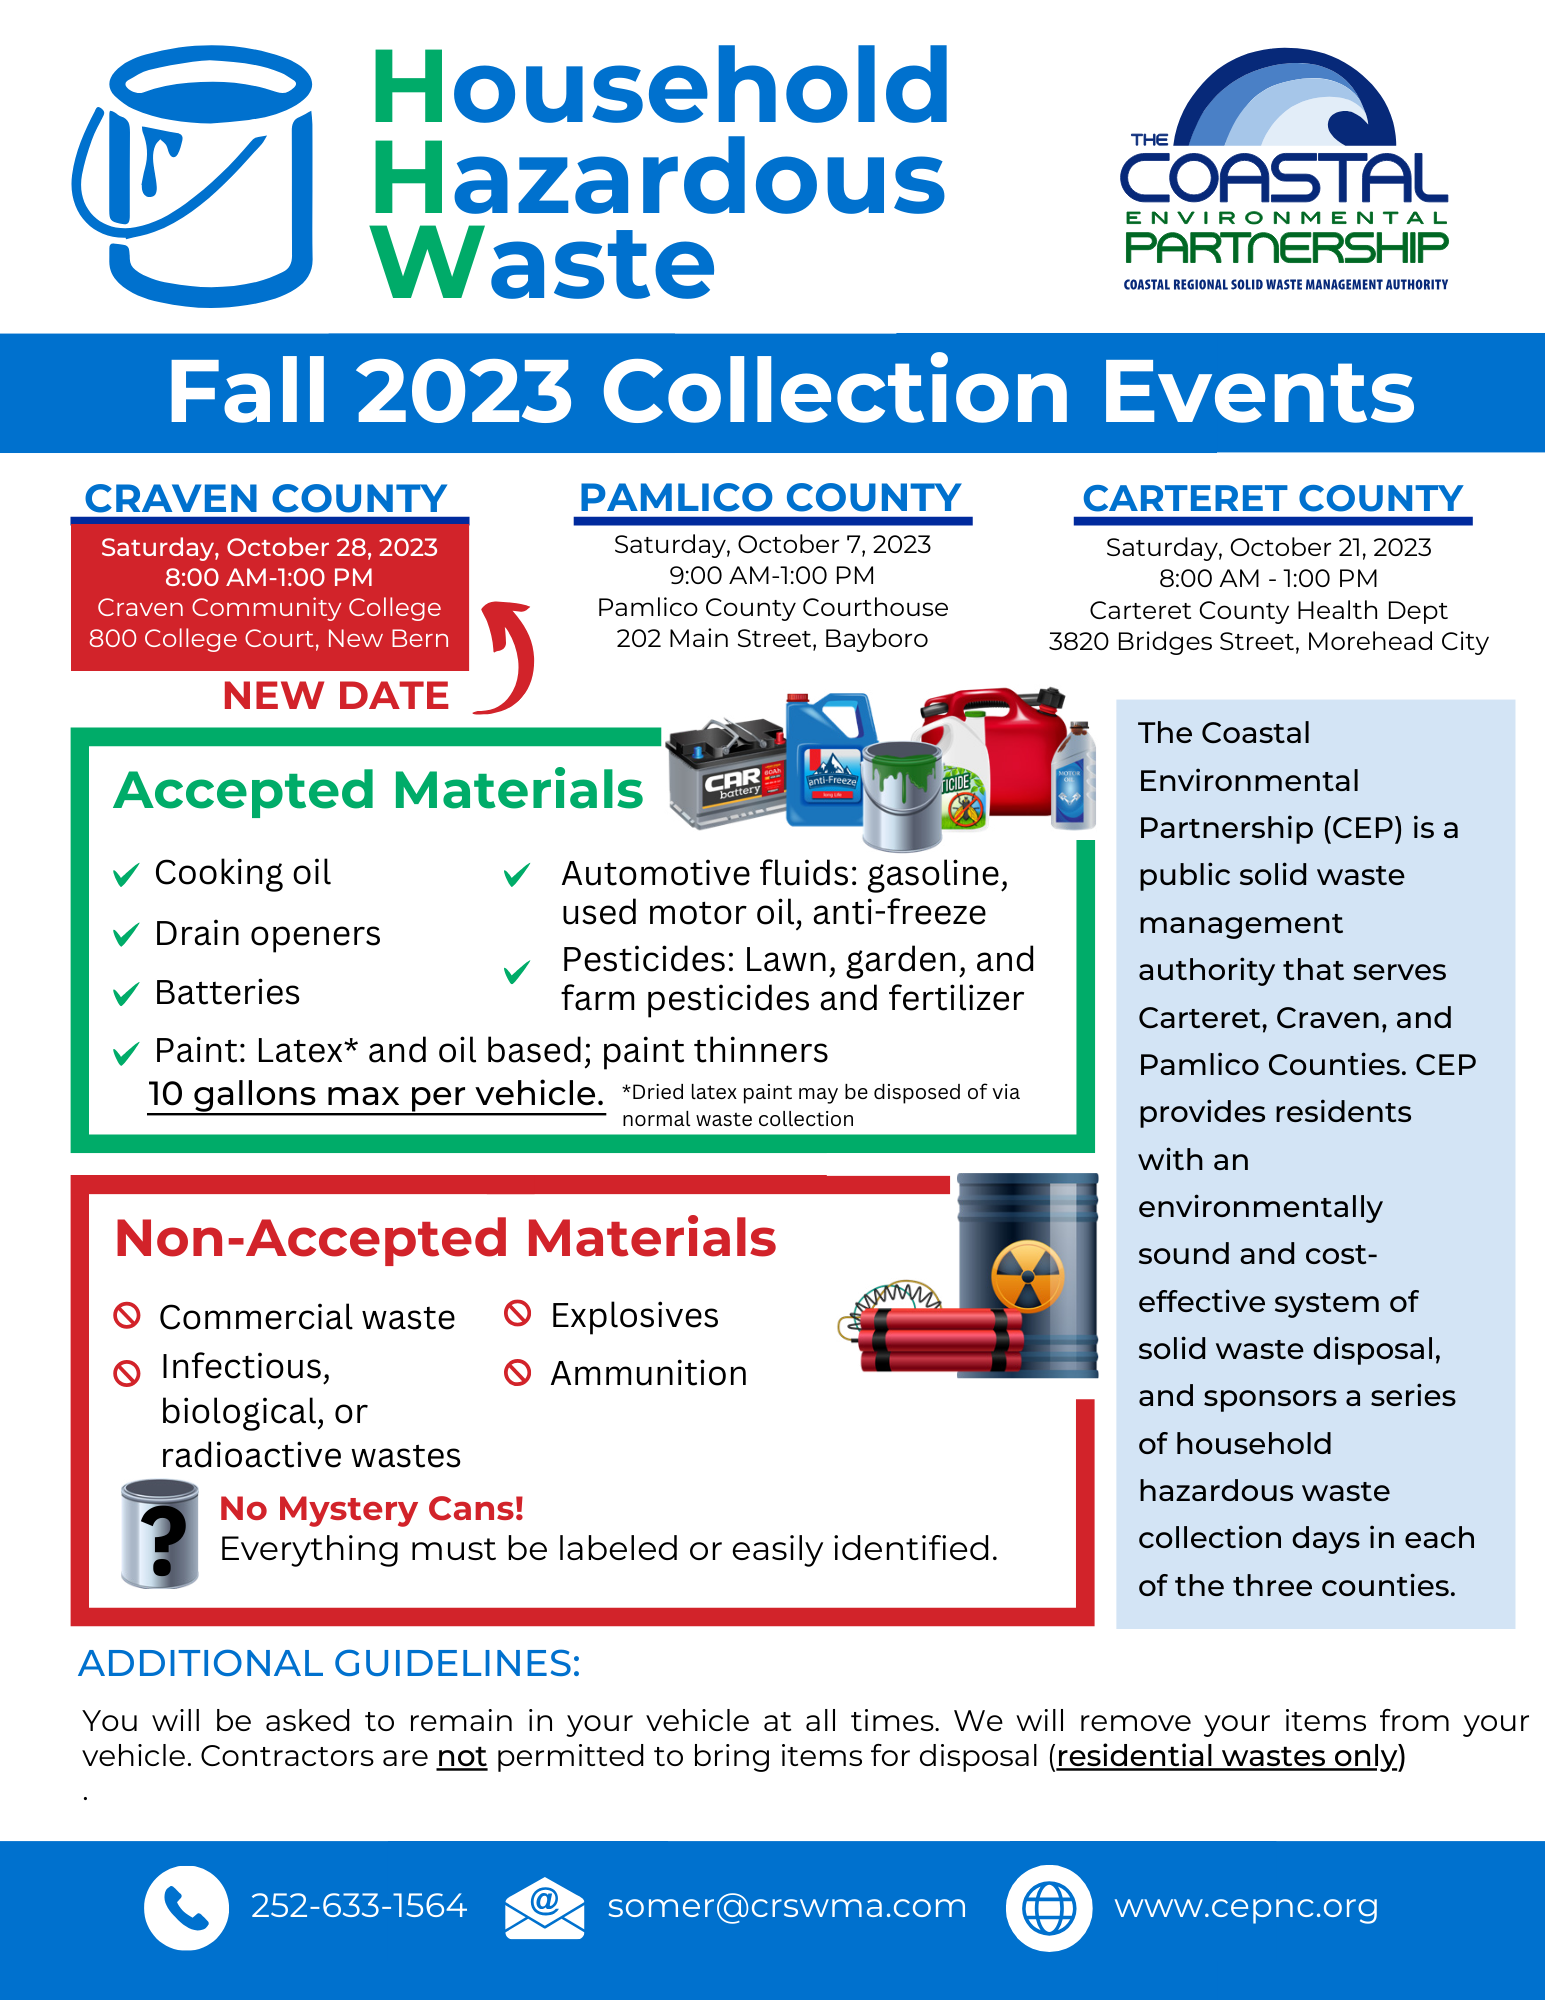 Brochure provided by the Coastal Environmental Partnership outlining hazardous household waste collection sites and dates. For more information, call 252-633-1564